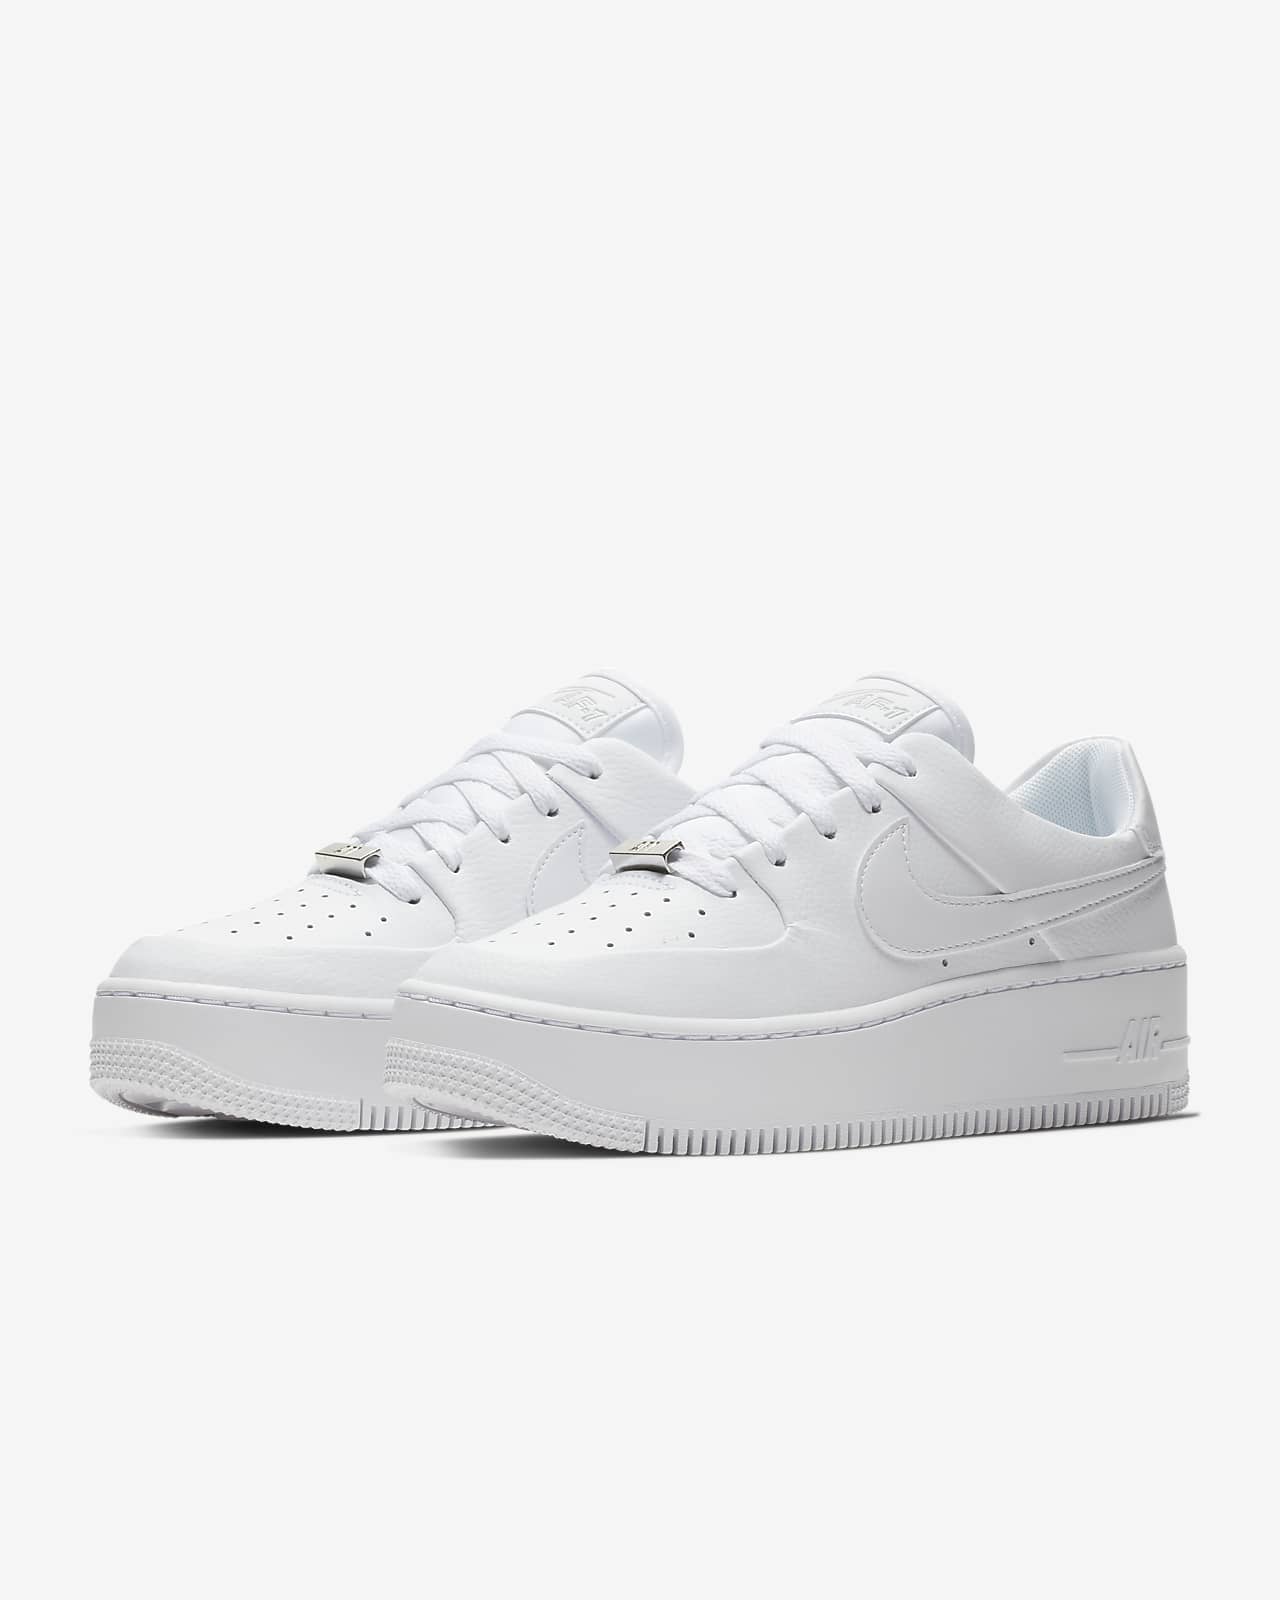 Nike Air Force 1 Low '07 Worldwide Pack White Blue Volt (Women's)